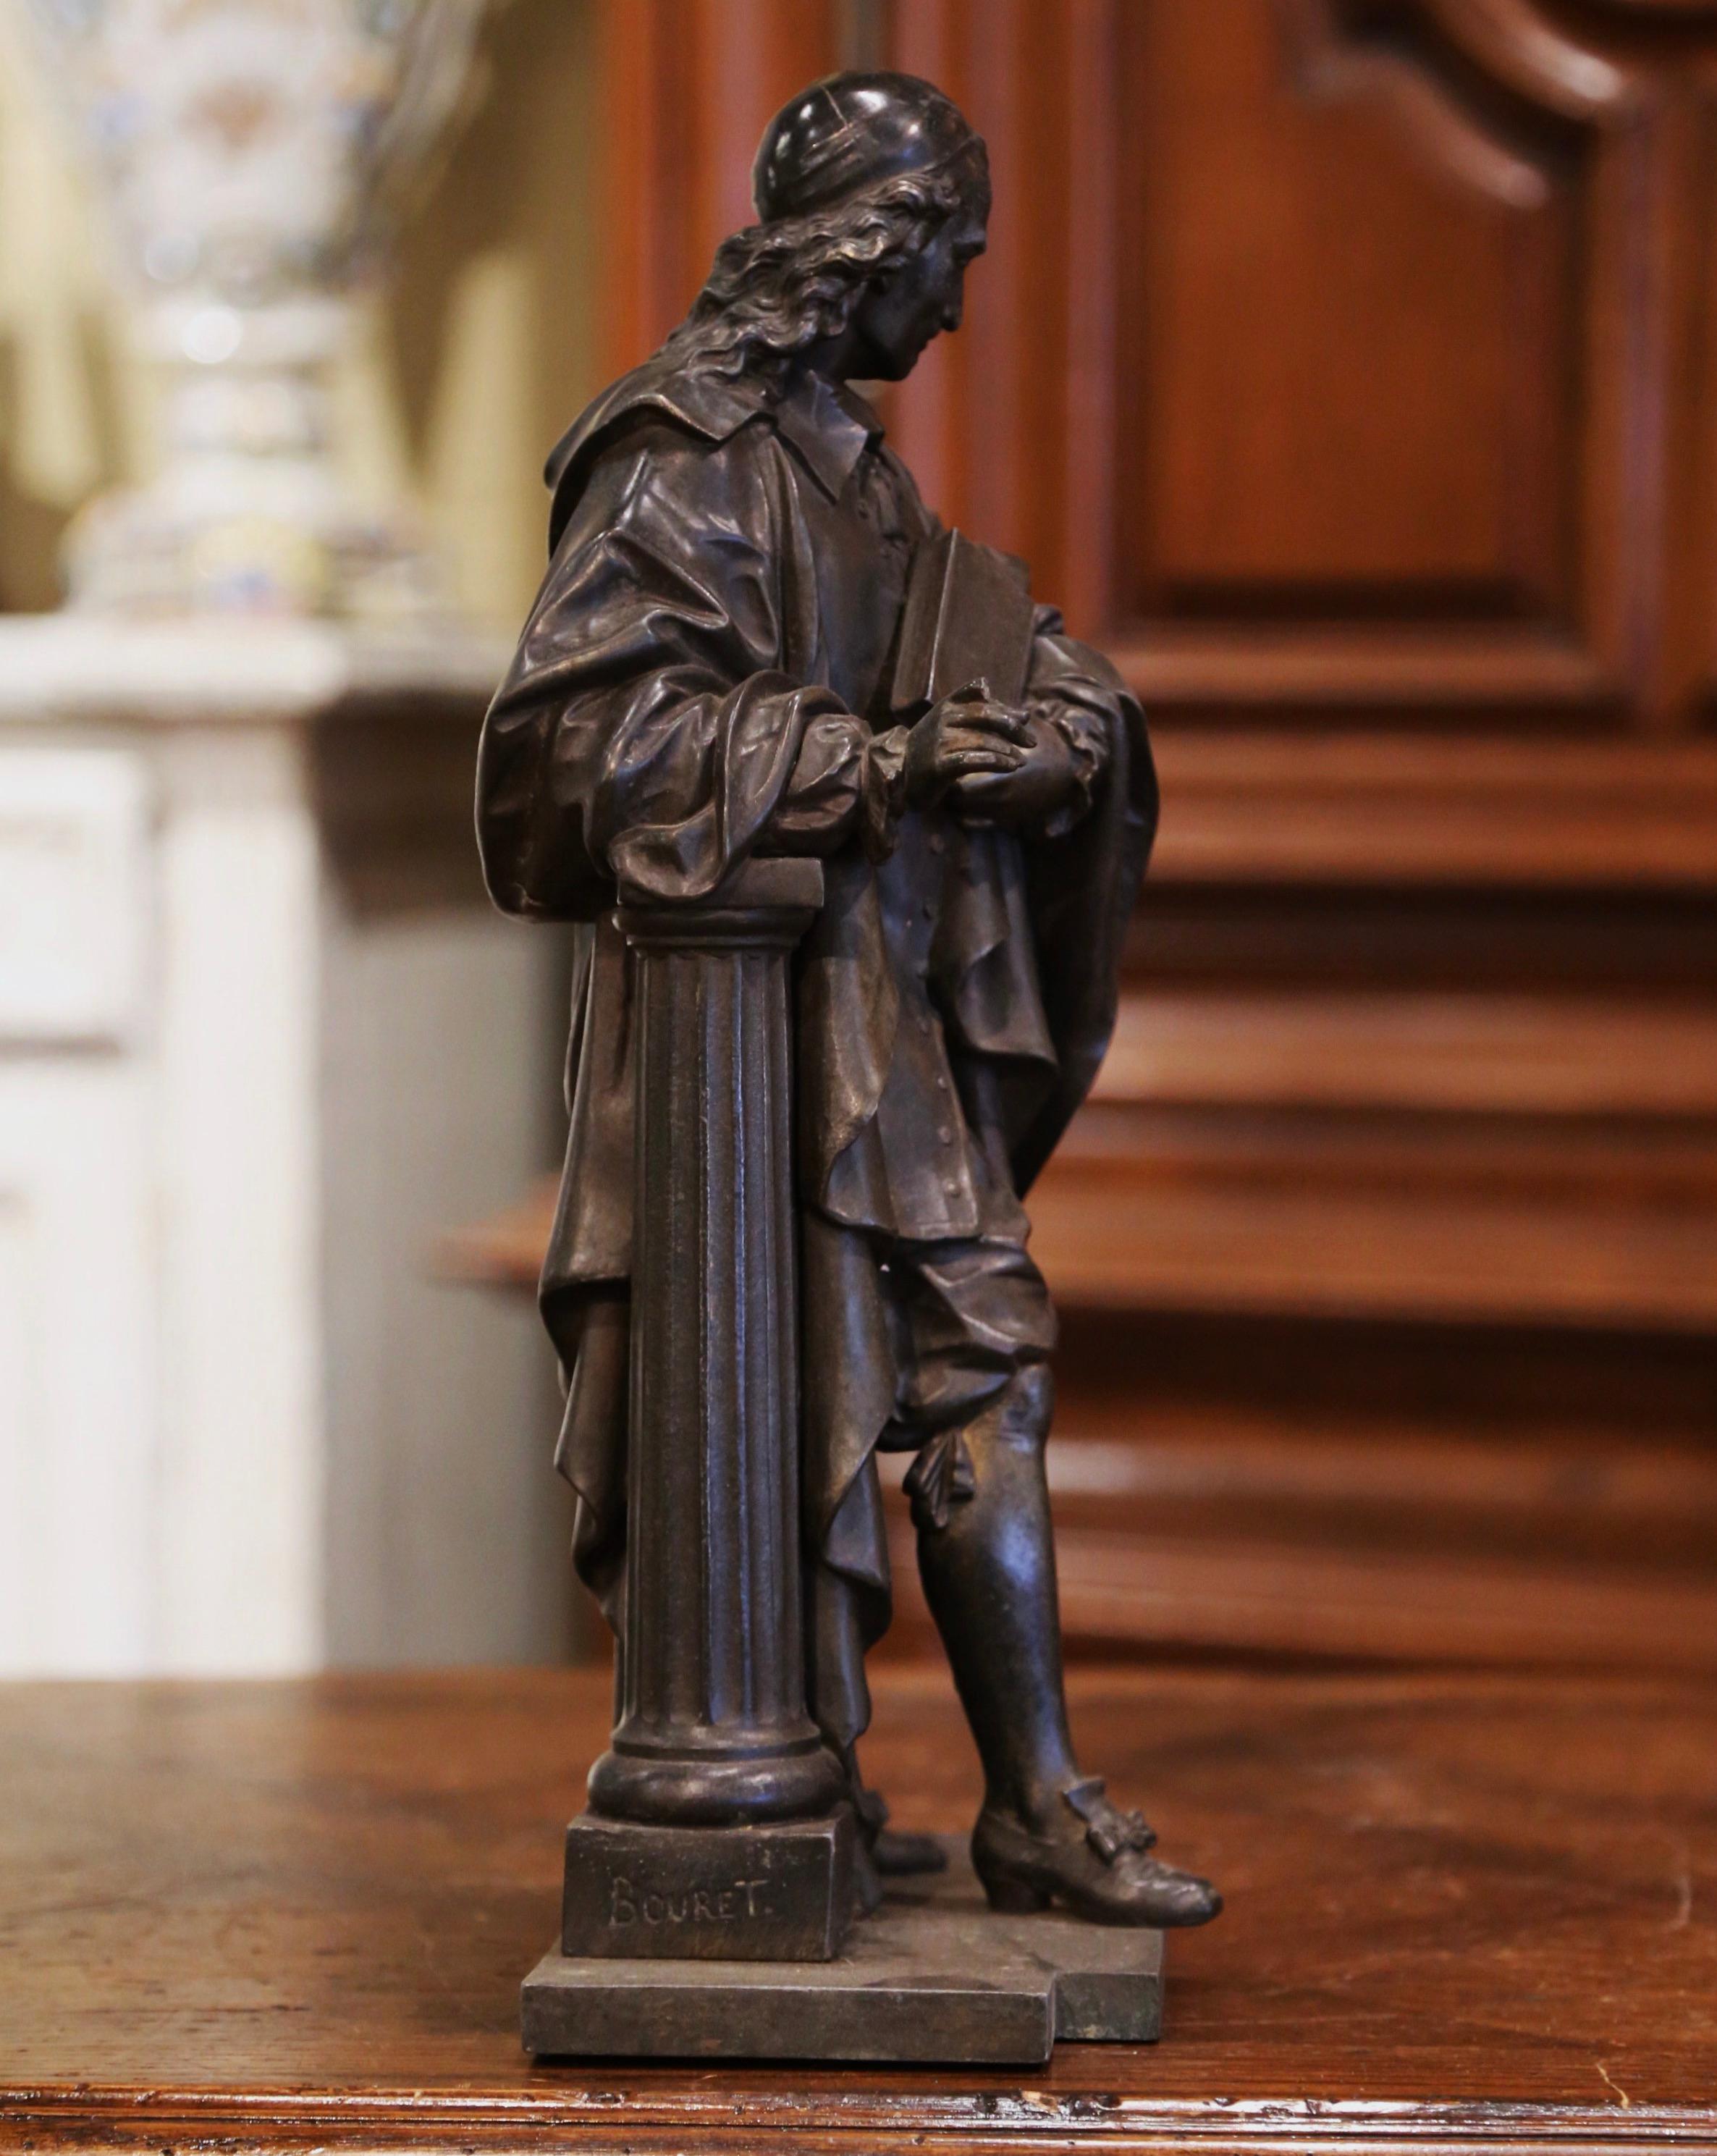 Decorate a study or office with this elegant antique statue. Crafted in France circa 1870 and built of metal, the figure depicts the cardinal Mazarin in formal clothing and holding a Bible. The sculpture is in excellent condition commensurate with